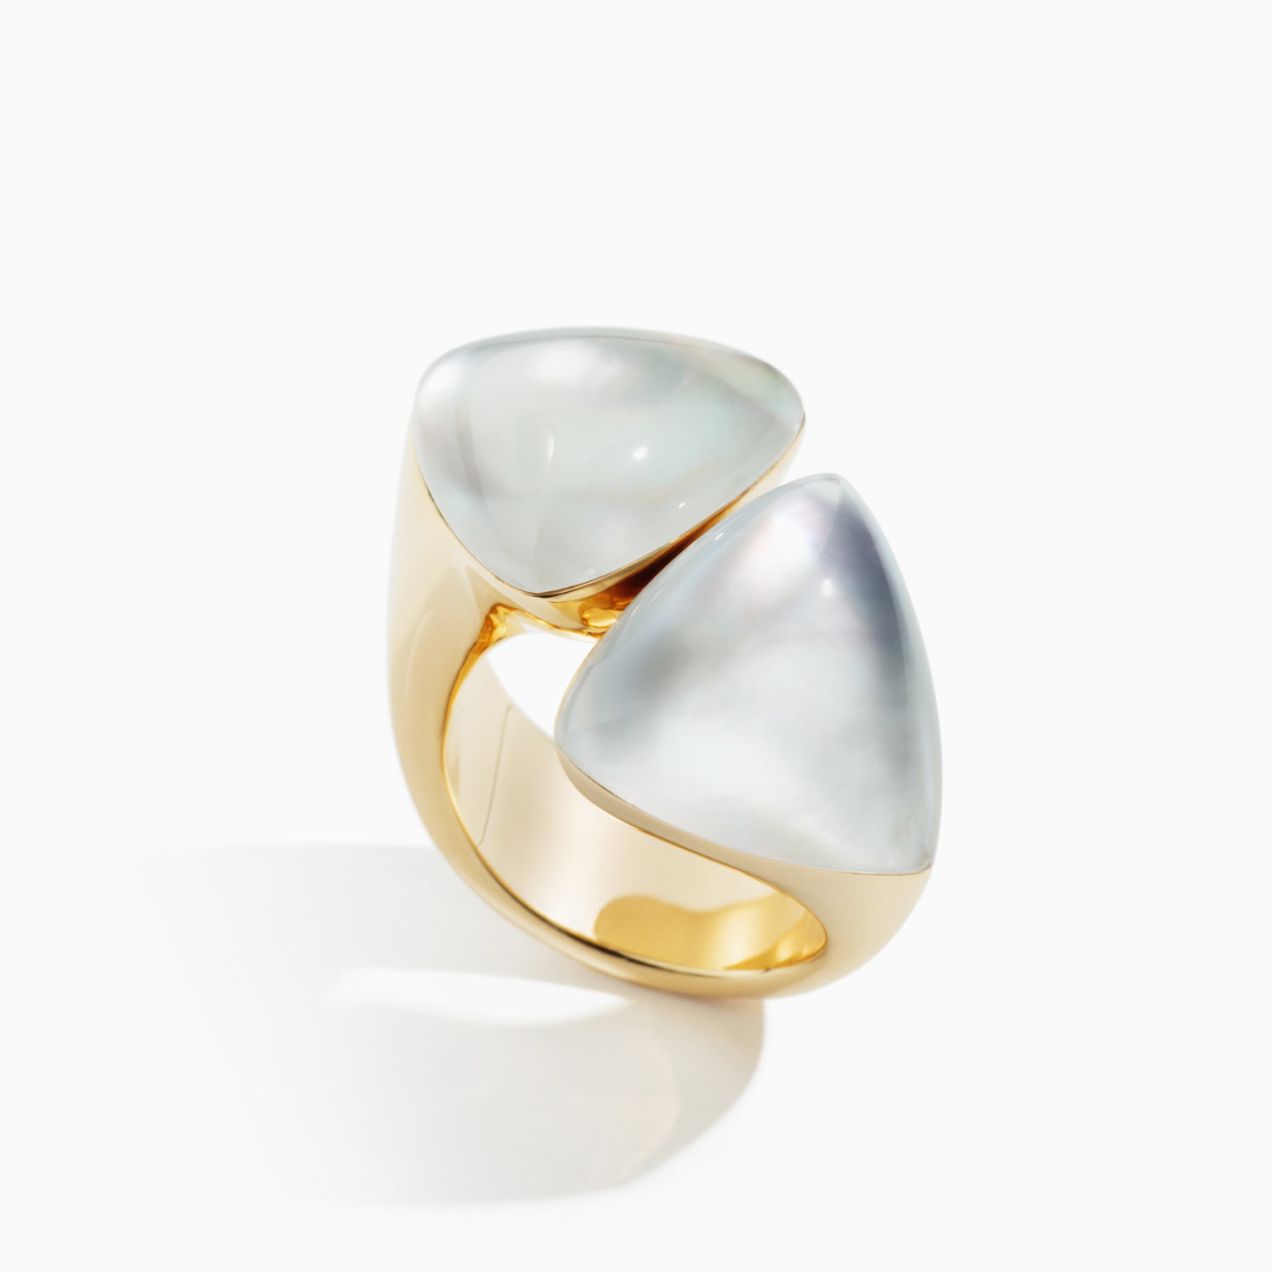 Vhernier freccia rose gold ring with quartz crystal and mother of pearl